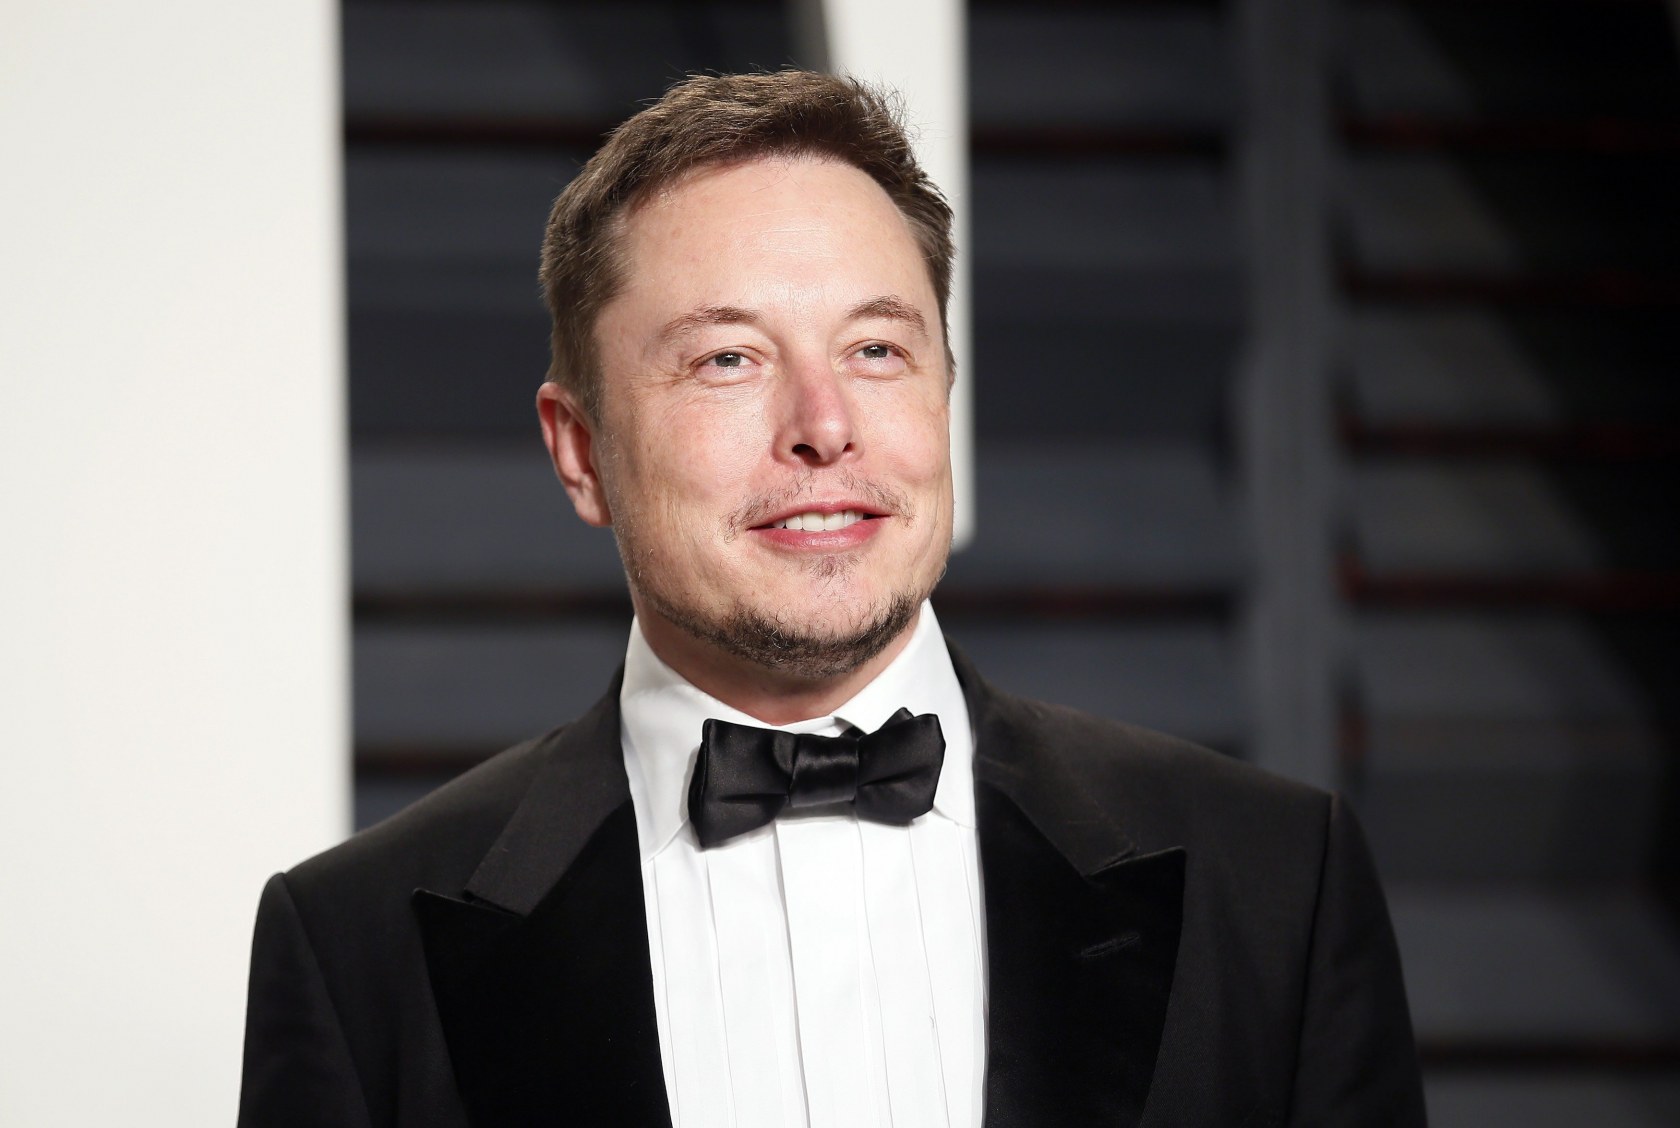 Elon Musk reportedly says Tesla has 10 months to break even, outlines 'hardcore' cost-cutting changes